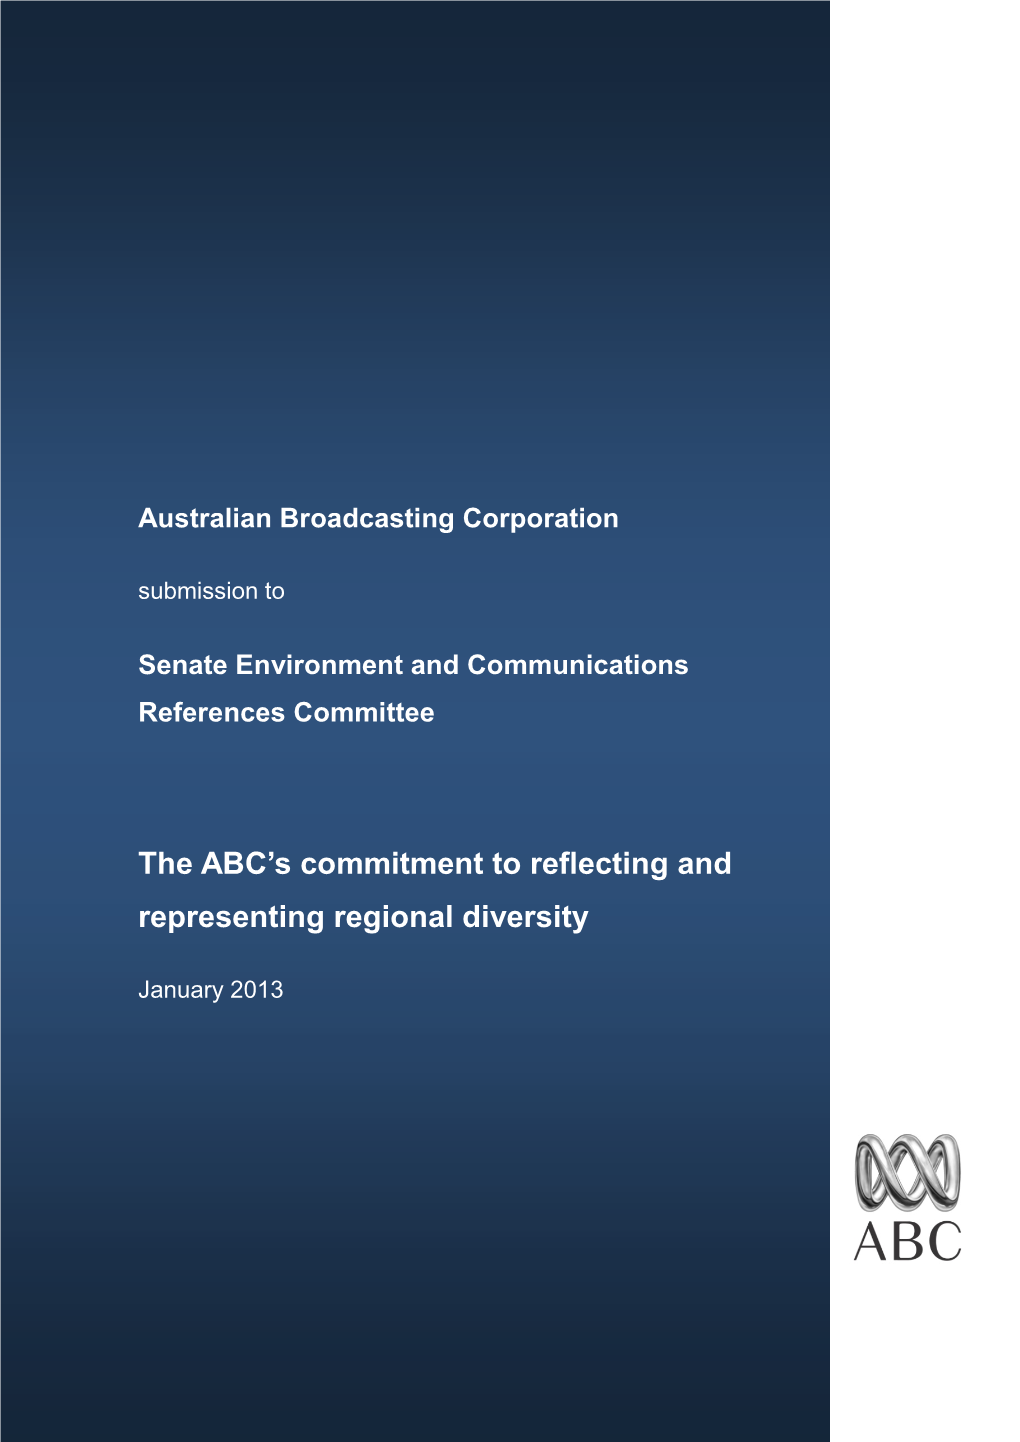 The ABC's Commitment to Reflecting and Representing Regional Diversity